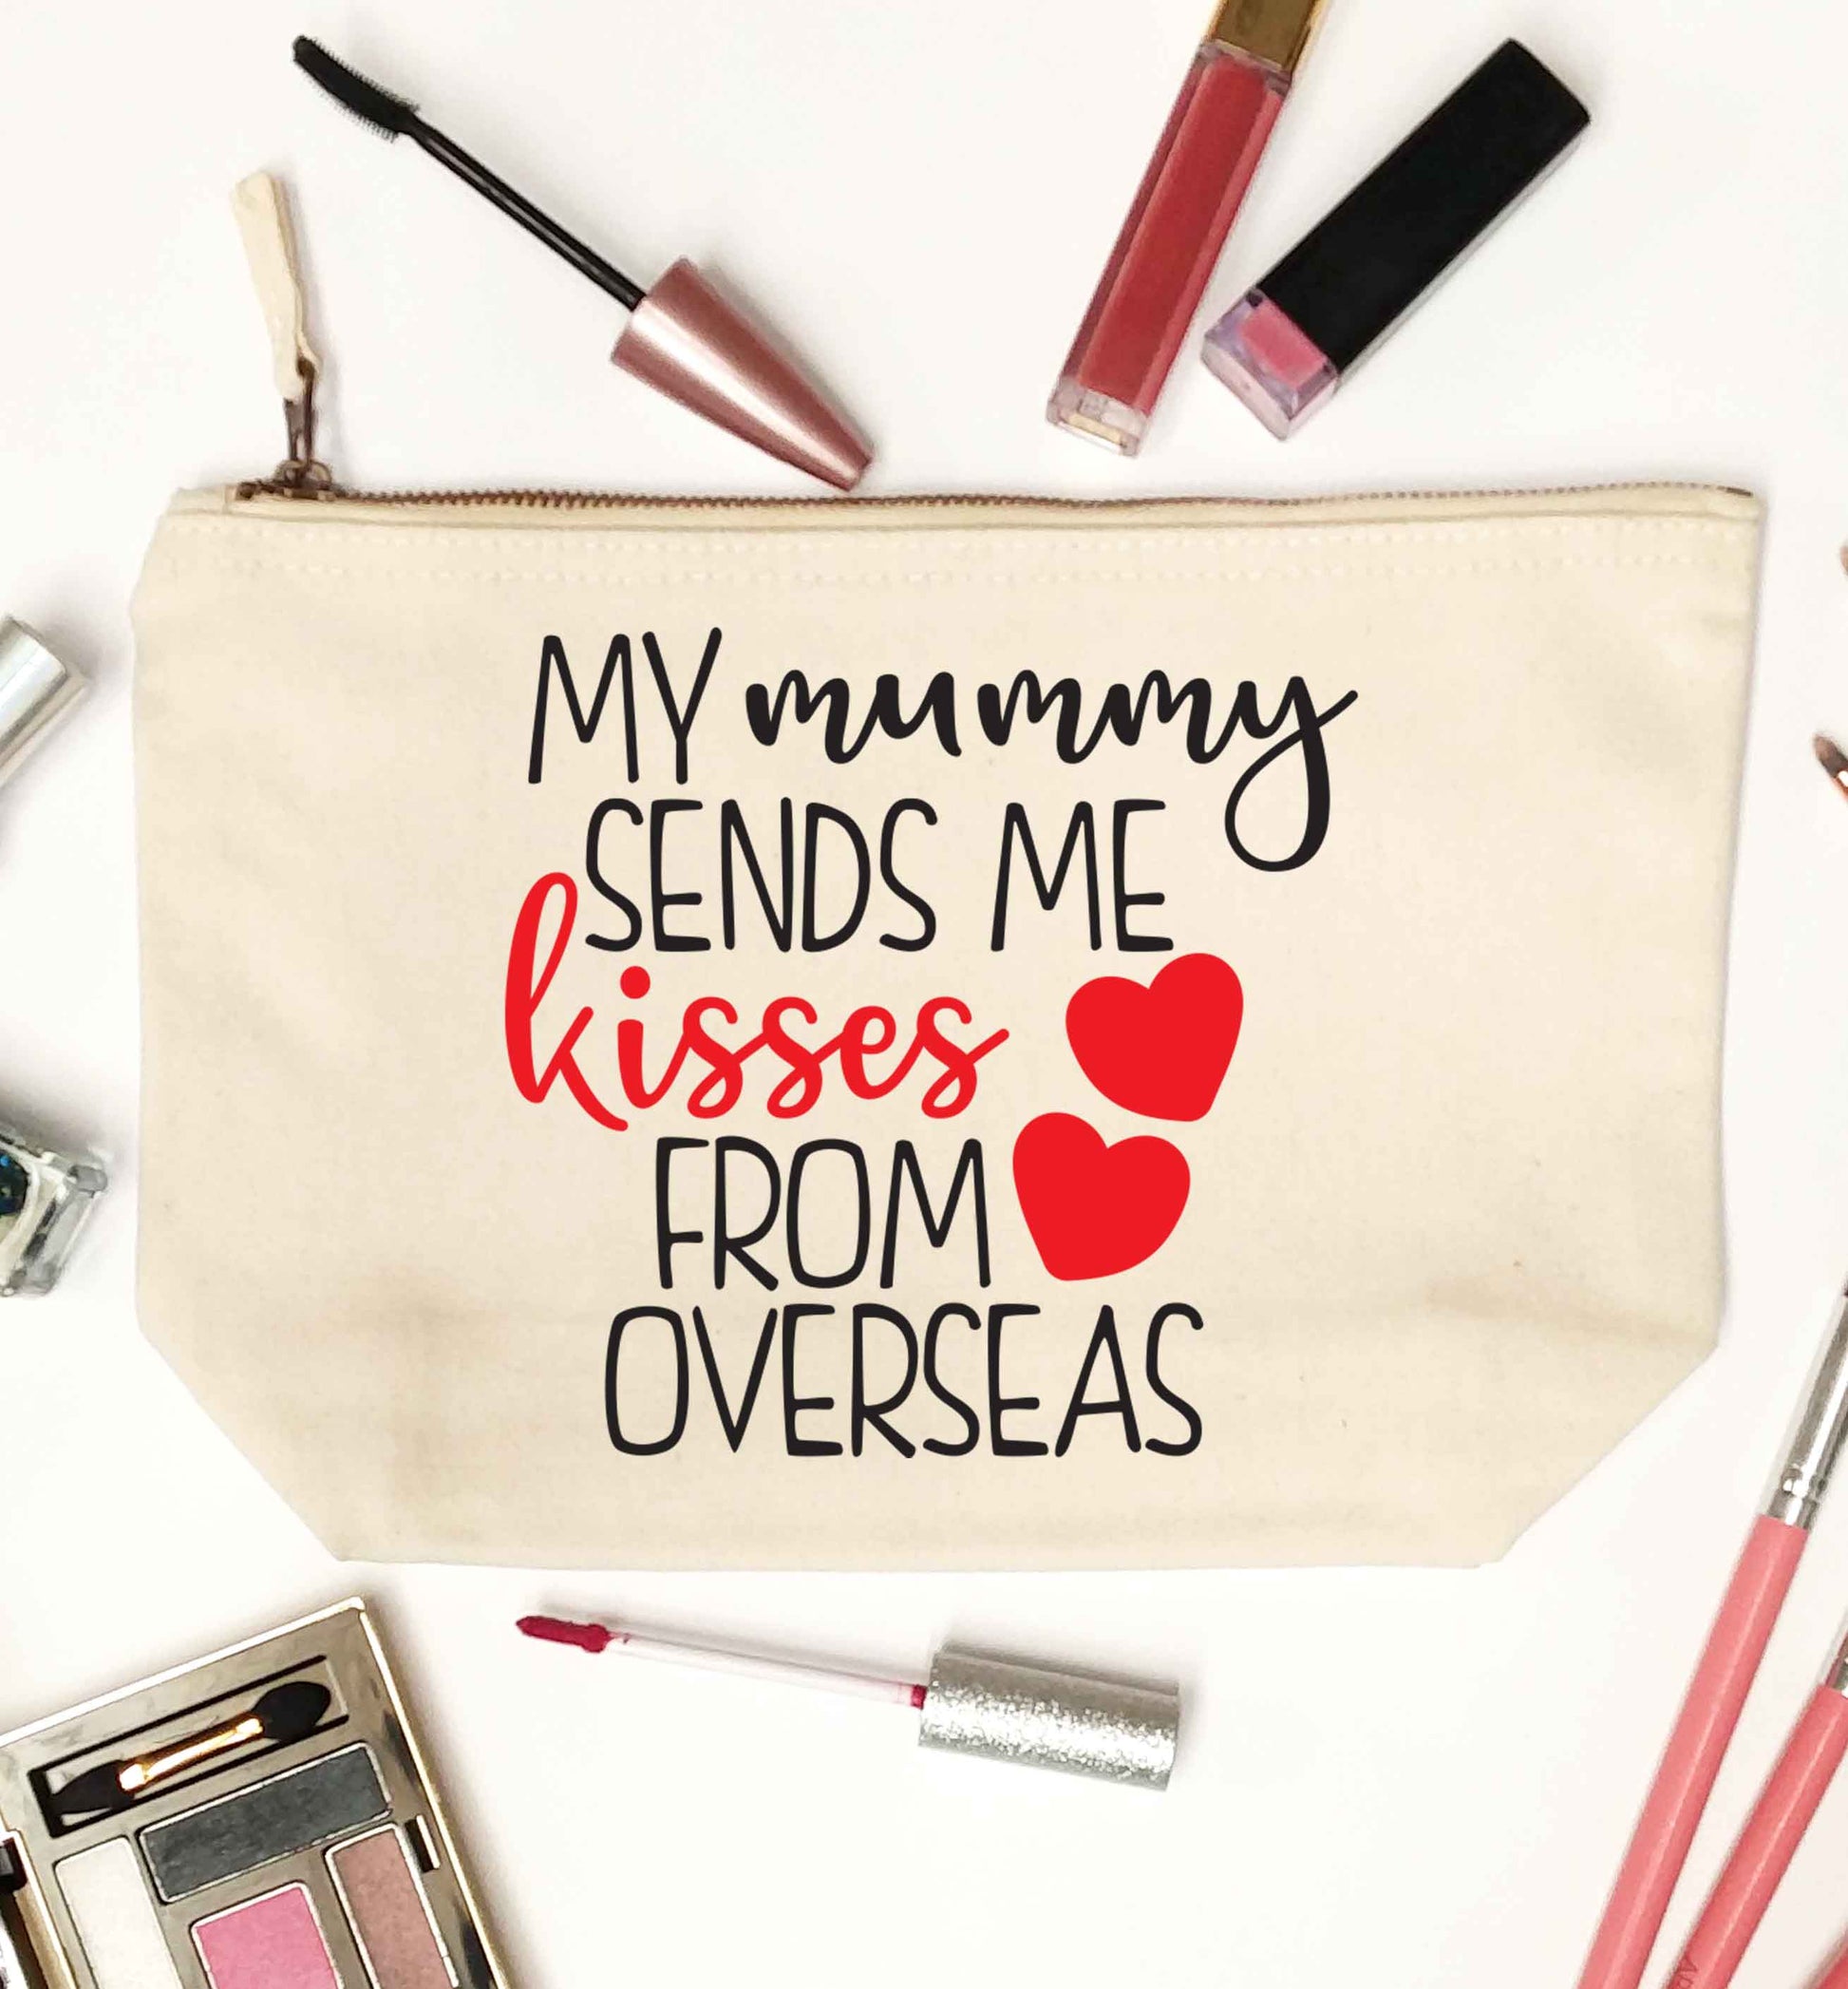 My mummy sends me kisses from overseas natural makeup bag